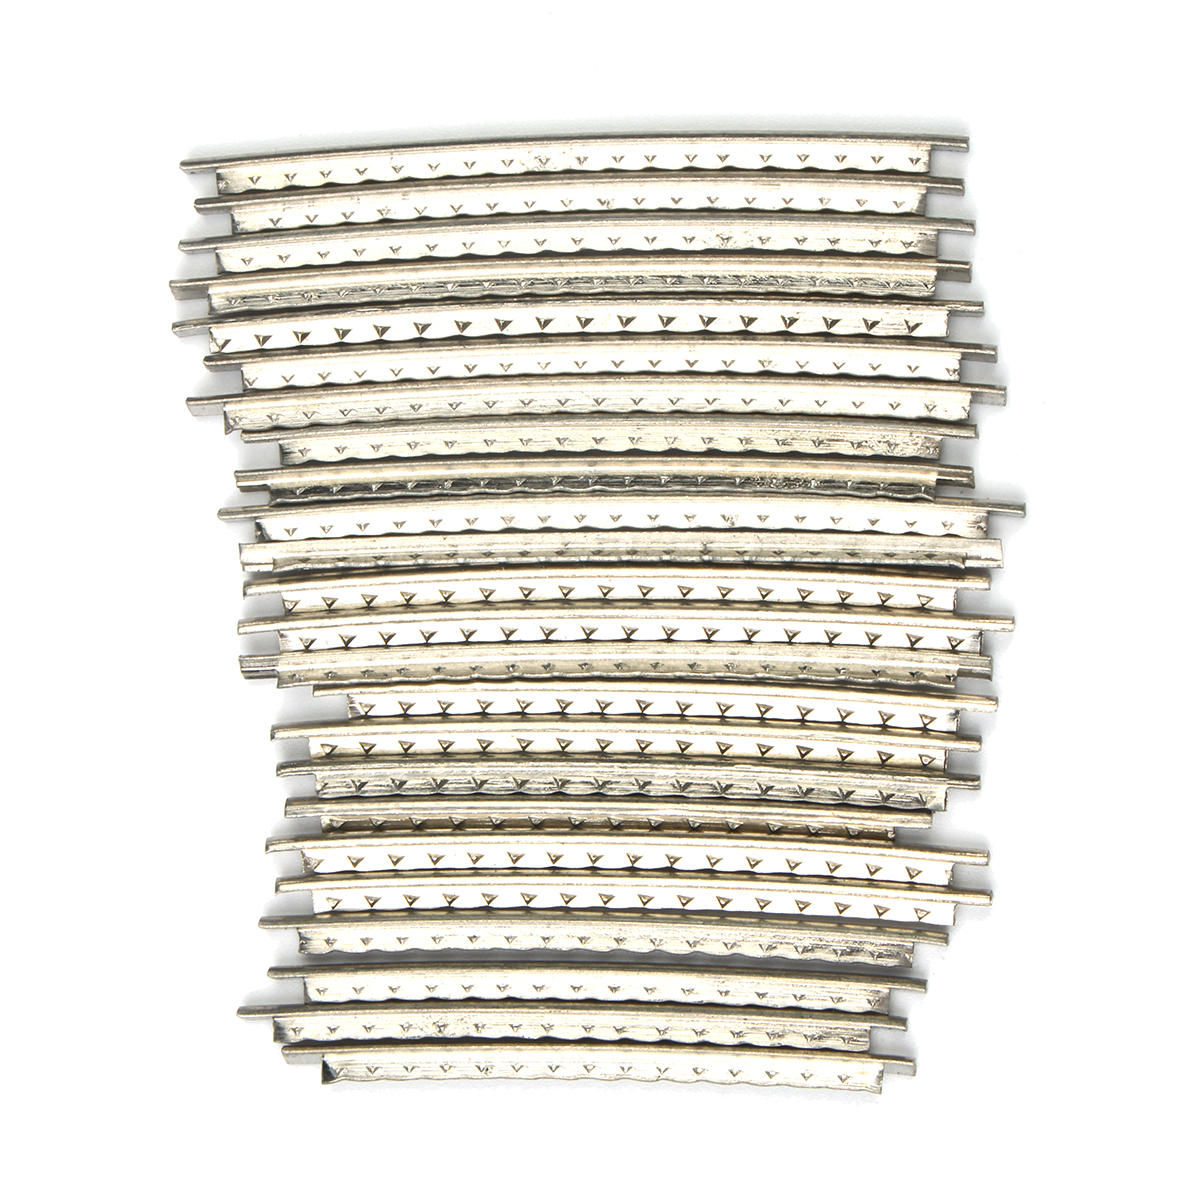 24pcs Set Electric Guitar Frets Wire Nickel-copper Alloy Fret Wire for Guitar Ukulele Musical Instruments Parts Accessor